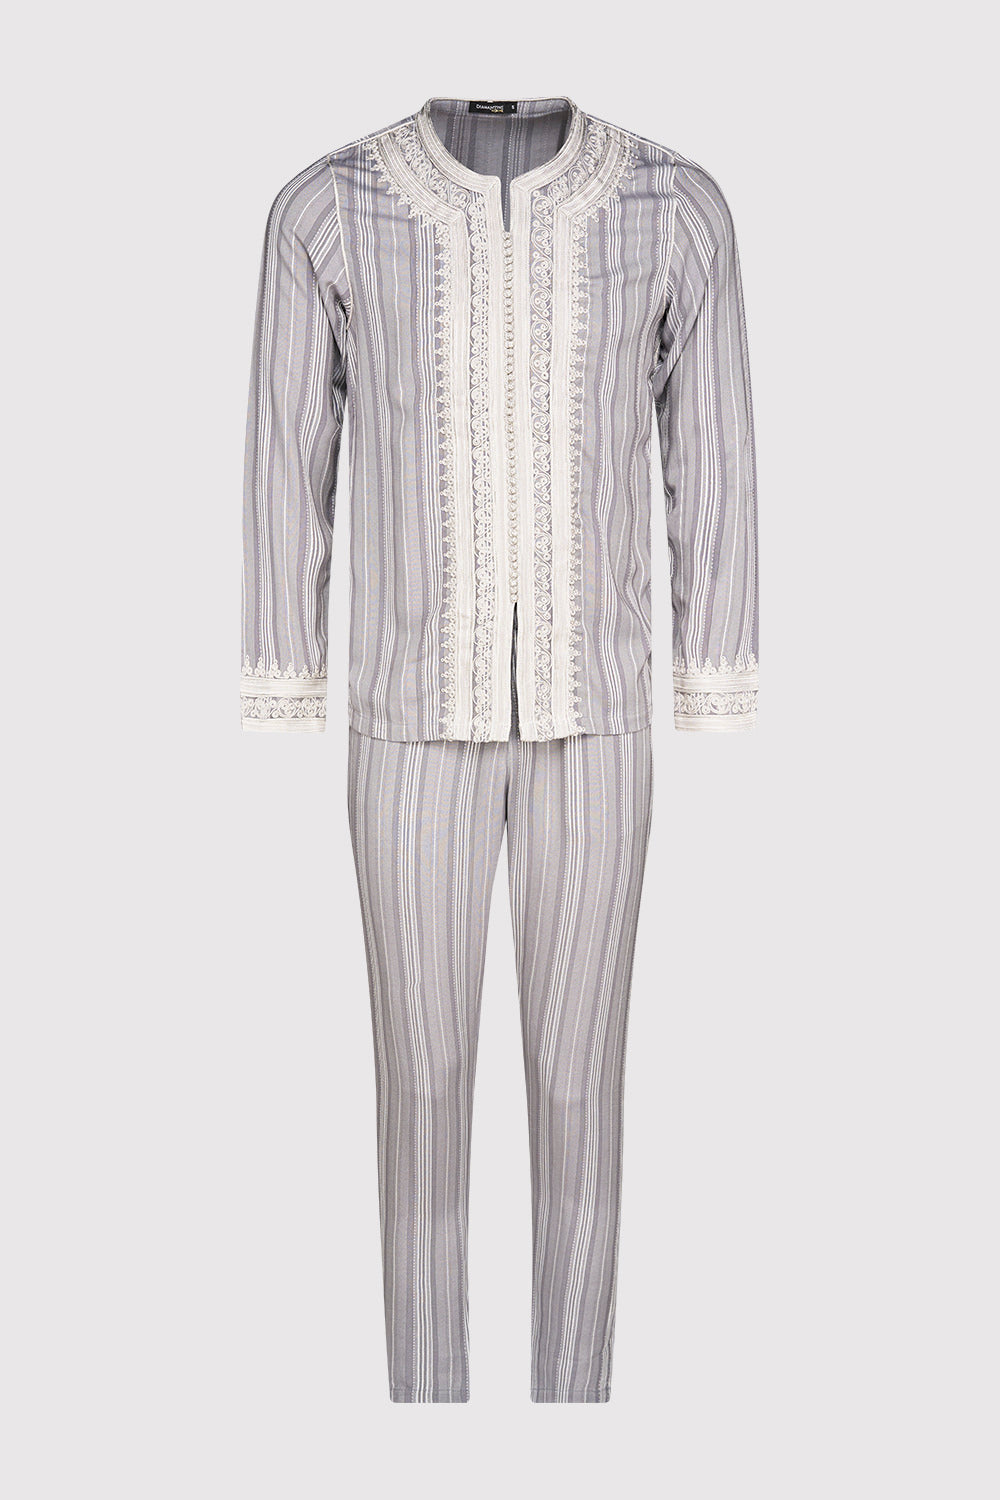 Jabador Nouh Embroidered Collarless Long Sleeve Tunic Top and Trousers Men's Co-Ord Set in Striped Grey